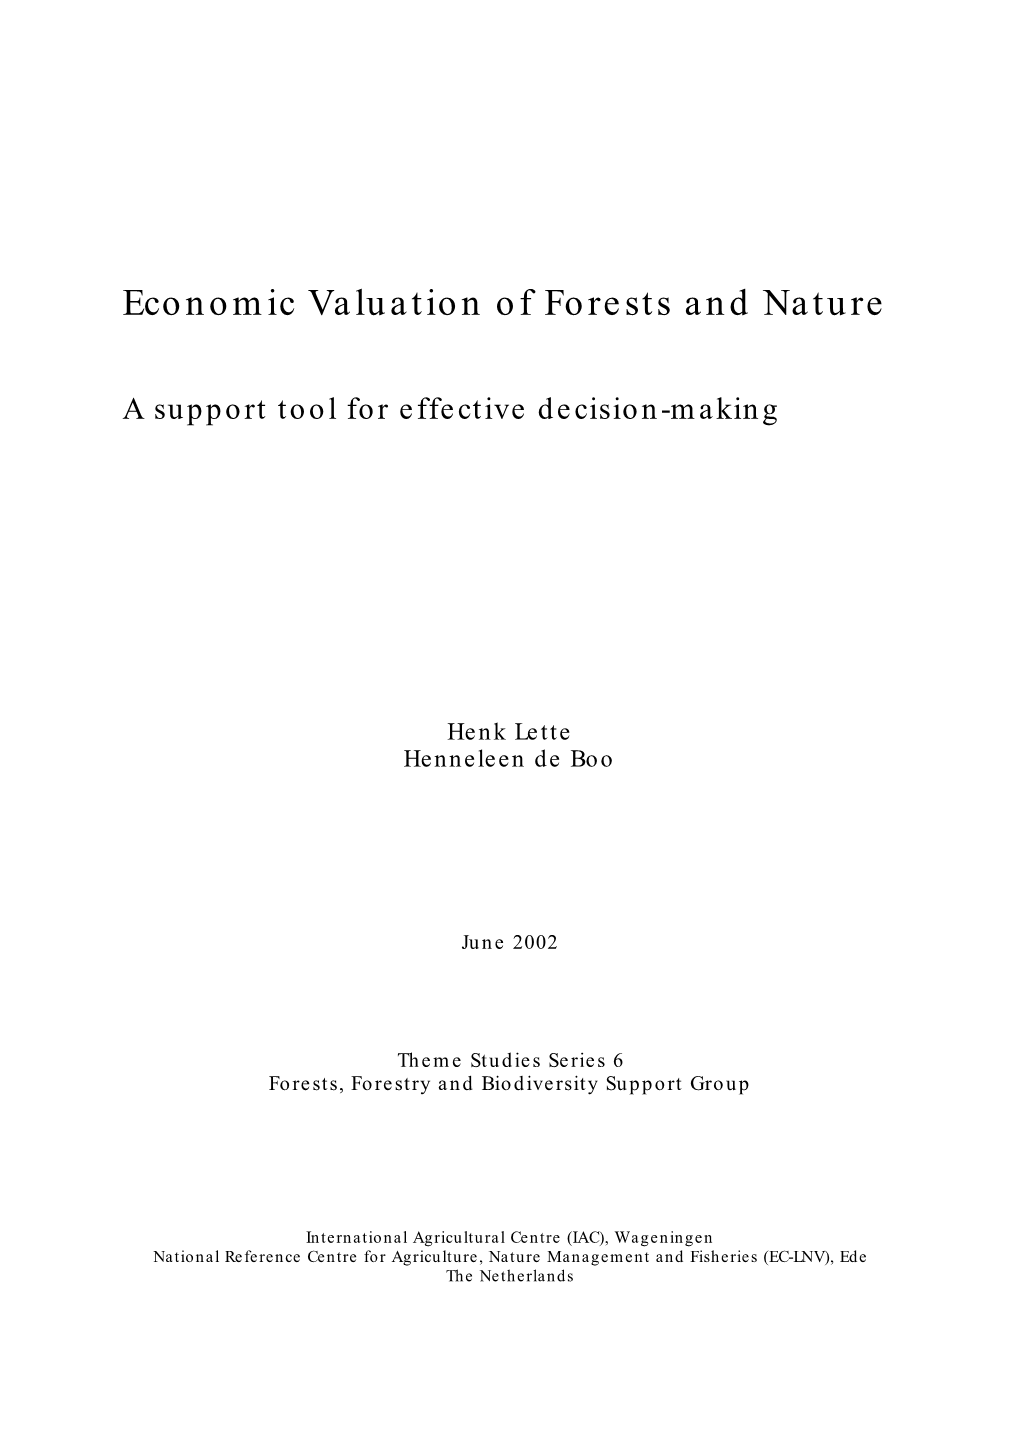 Economic Valuation of Forests and Nature